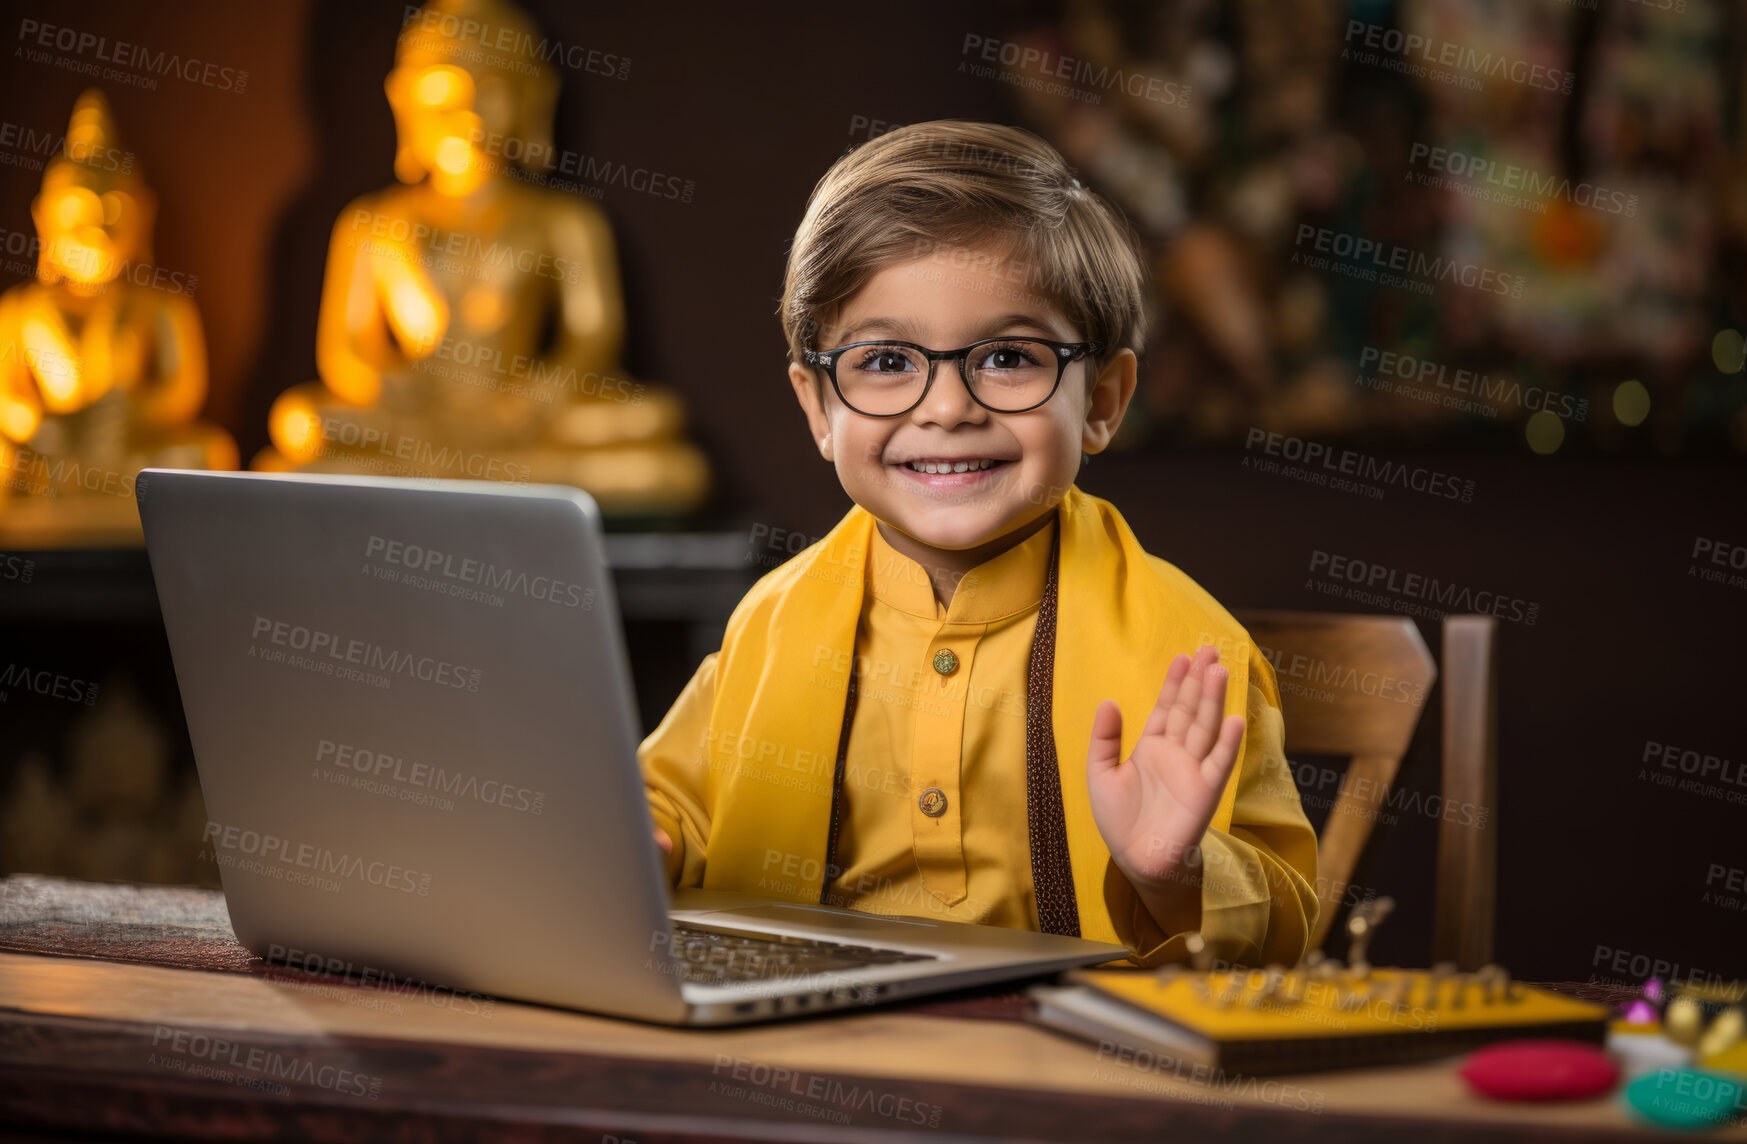 Buy stock photo Portrait of buddhist boy sitting at table with laptop. Religion concept.